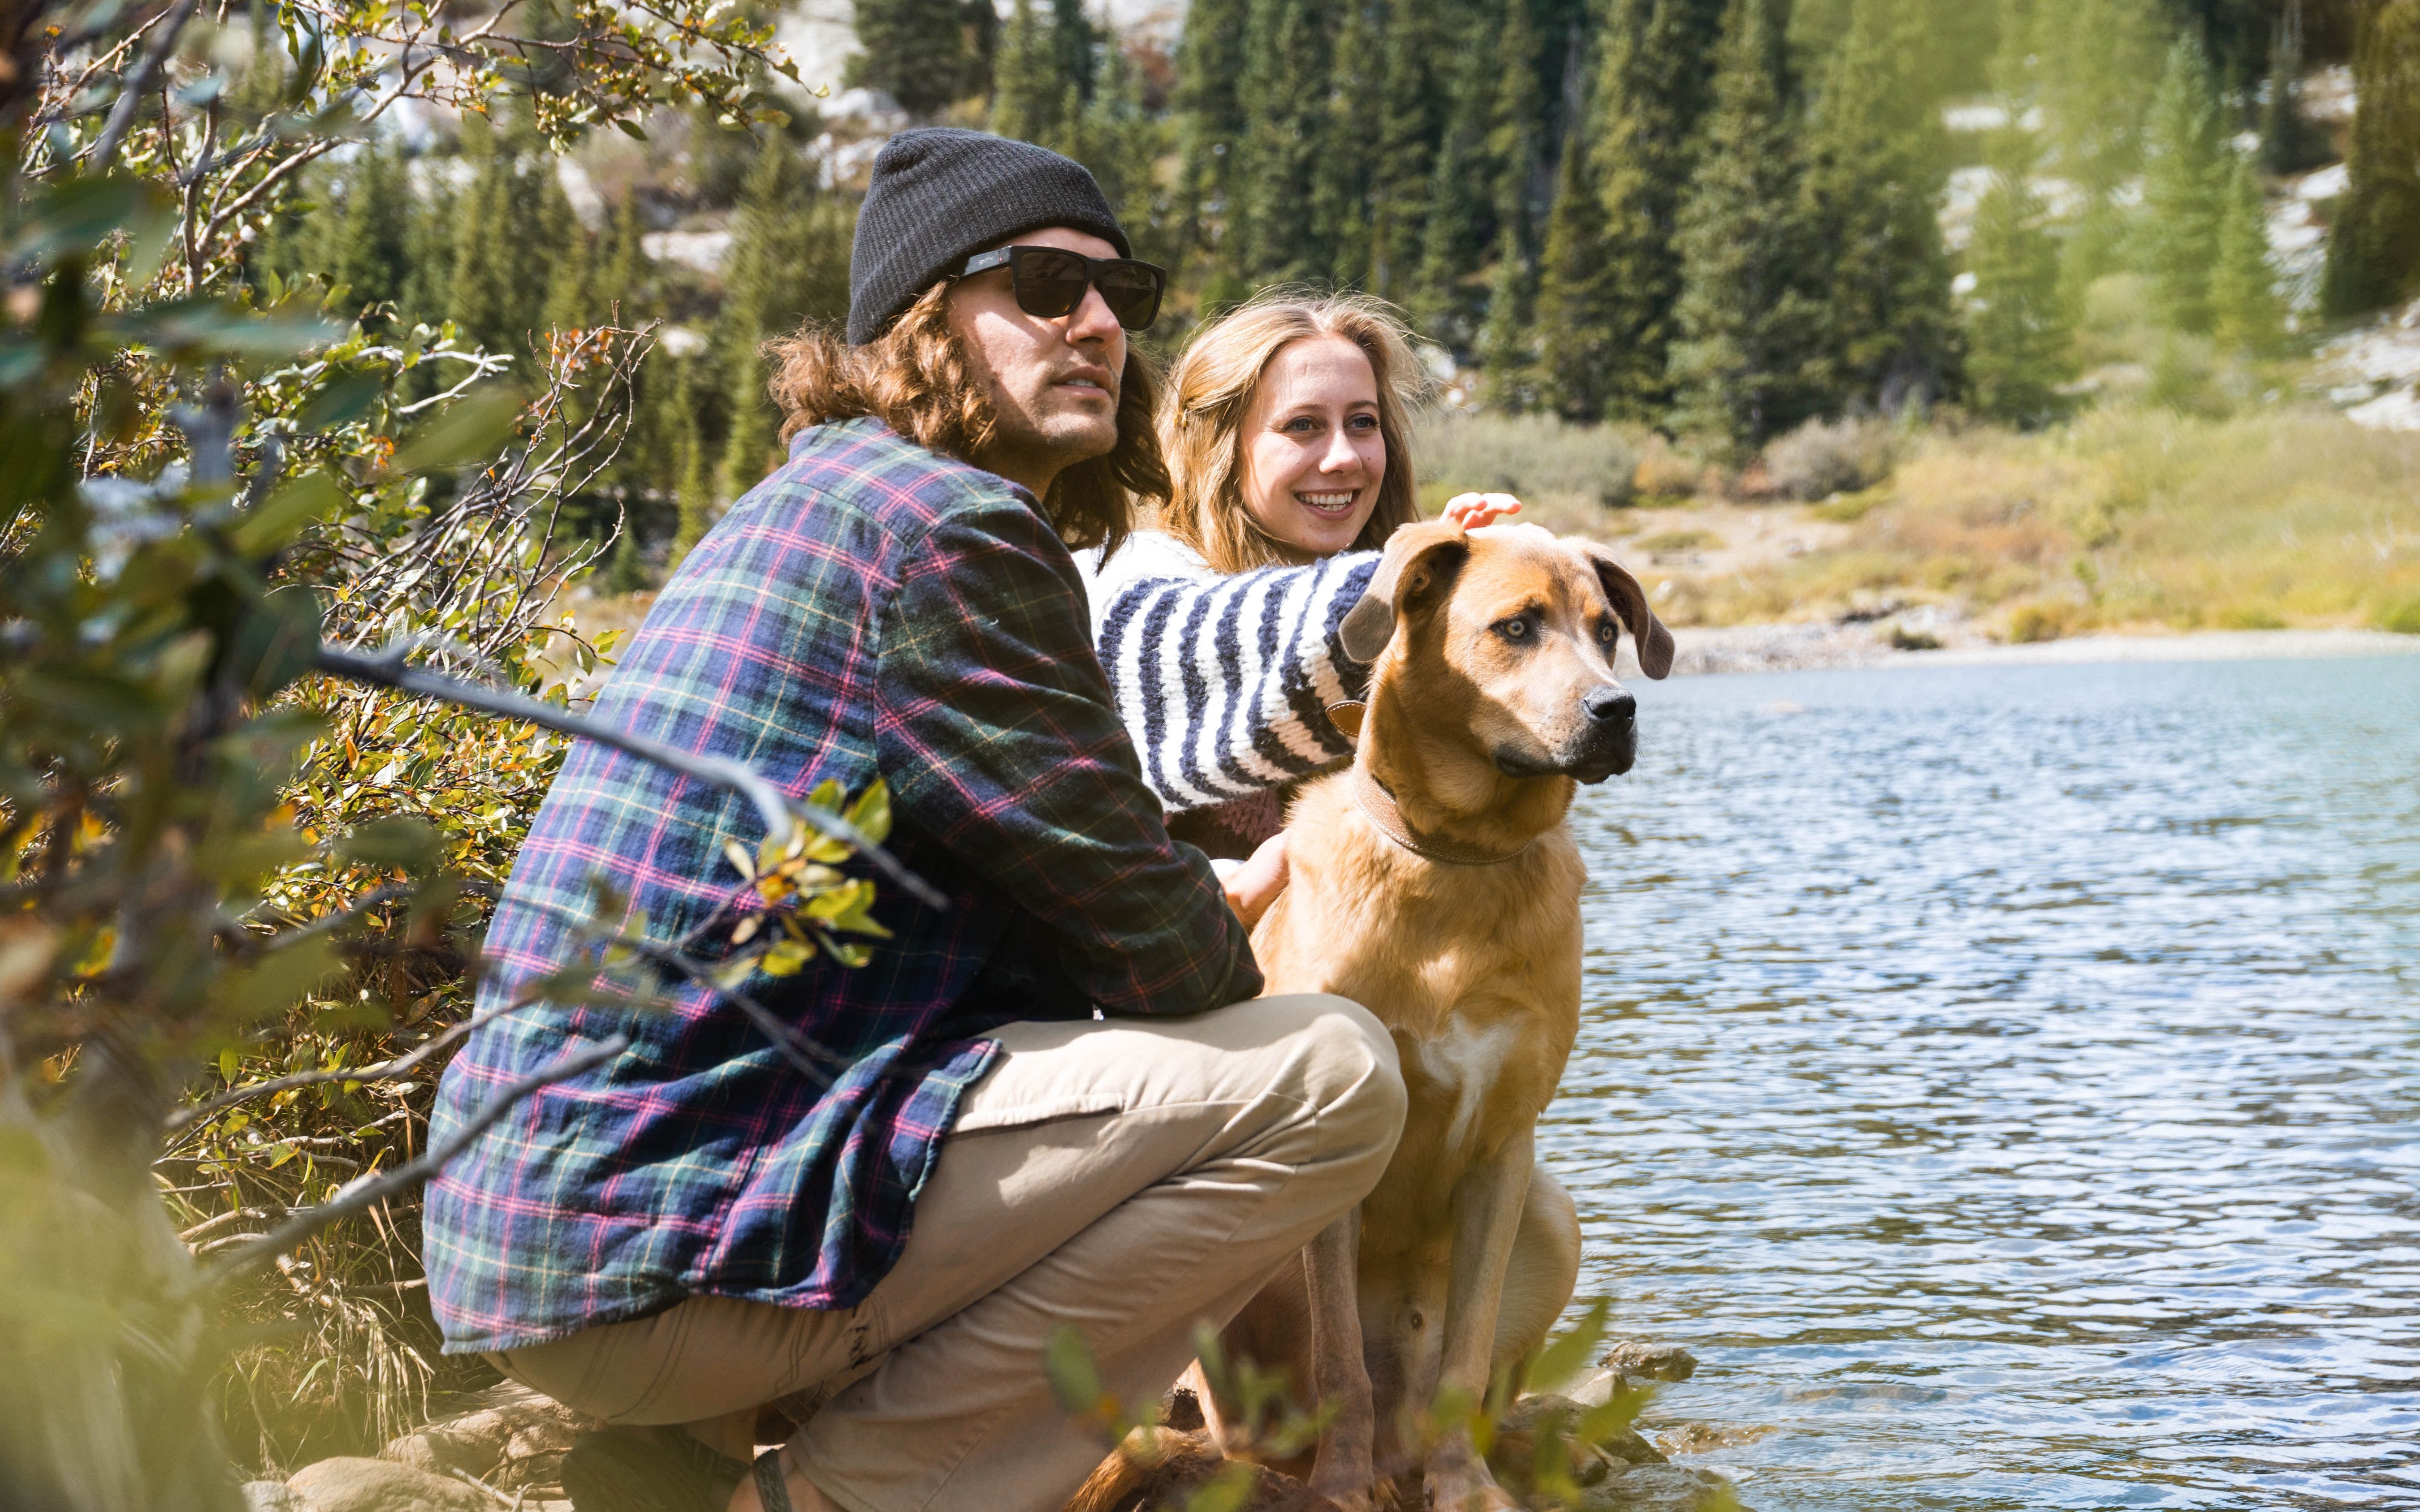 Man with a beanie and woman in striped sweater with a large tan dog sitting by the water in nature